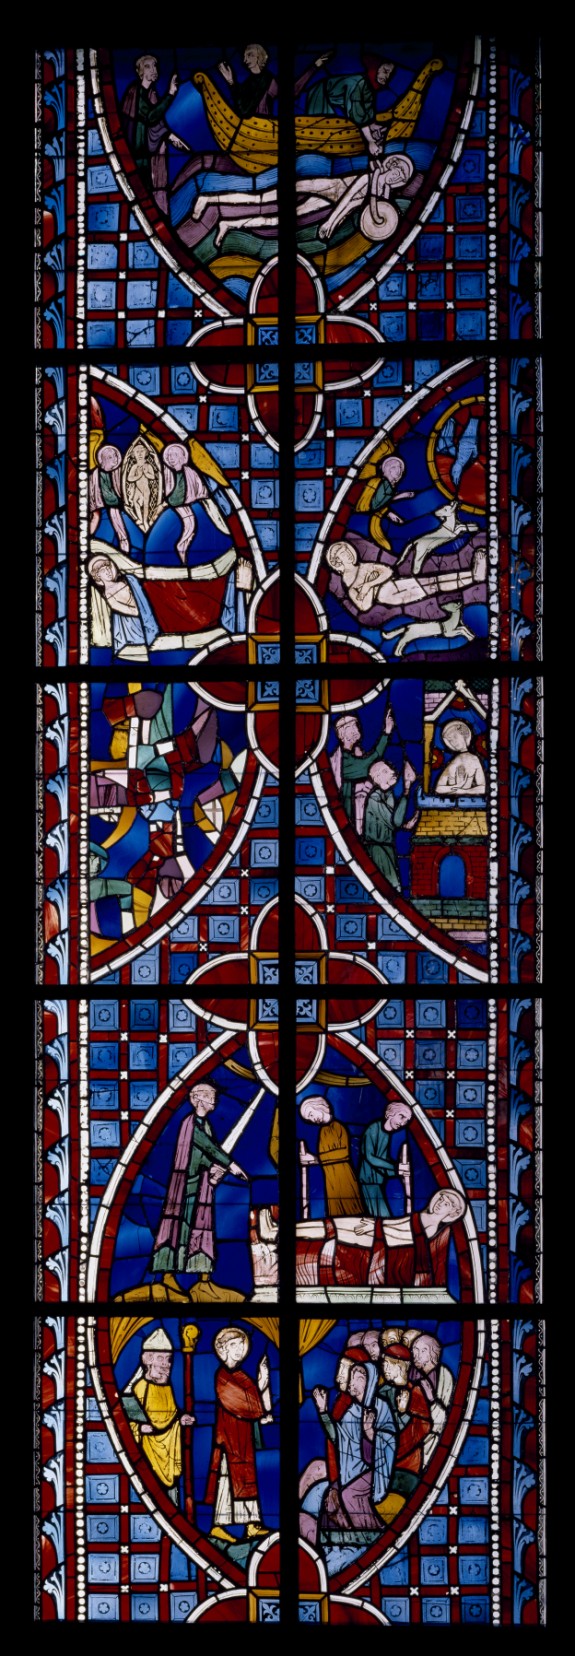 Stained glass window with scenes from the Life of Saint Vincent, 1245-1247